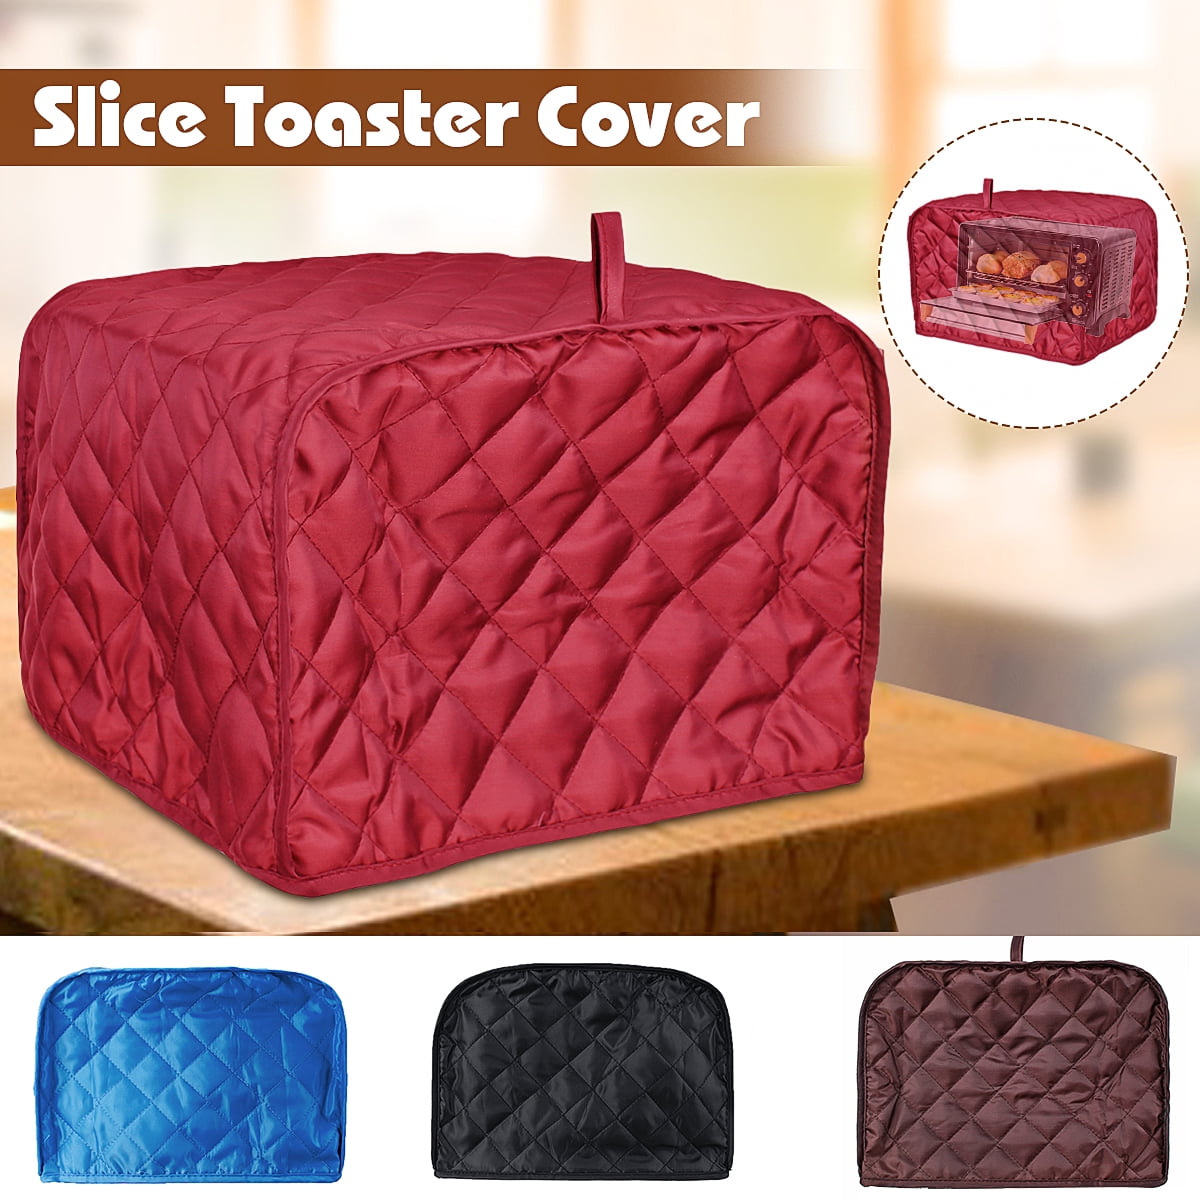 Two Slices Bread Toaster Cover Polyester Protector Dustproof For Home Kitchen